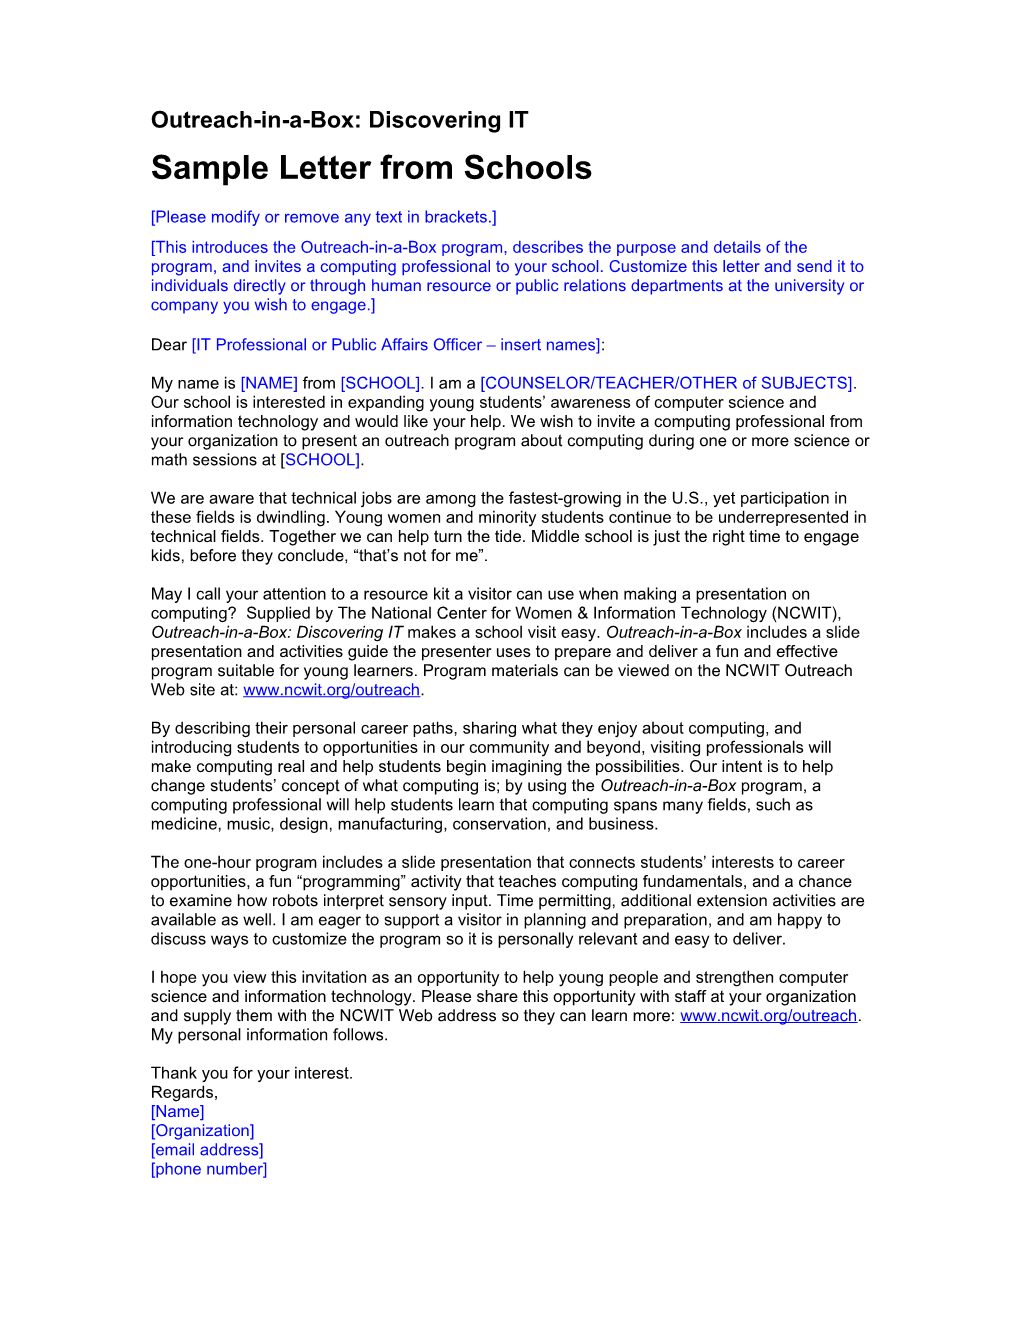 Sample Letter from Schools